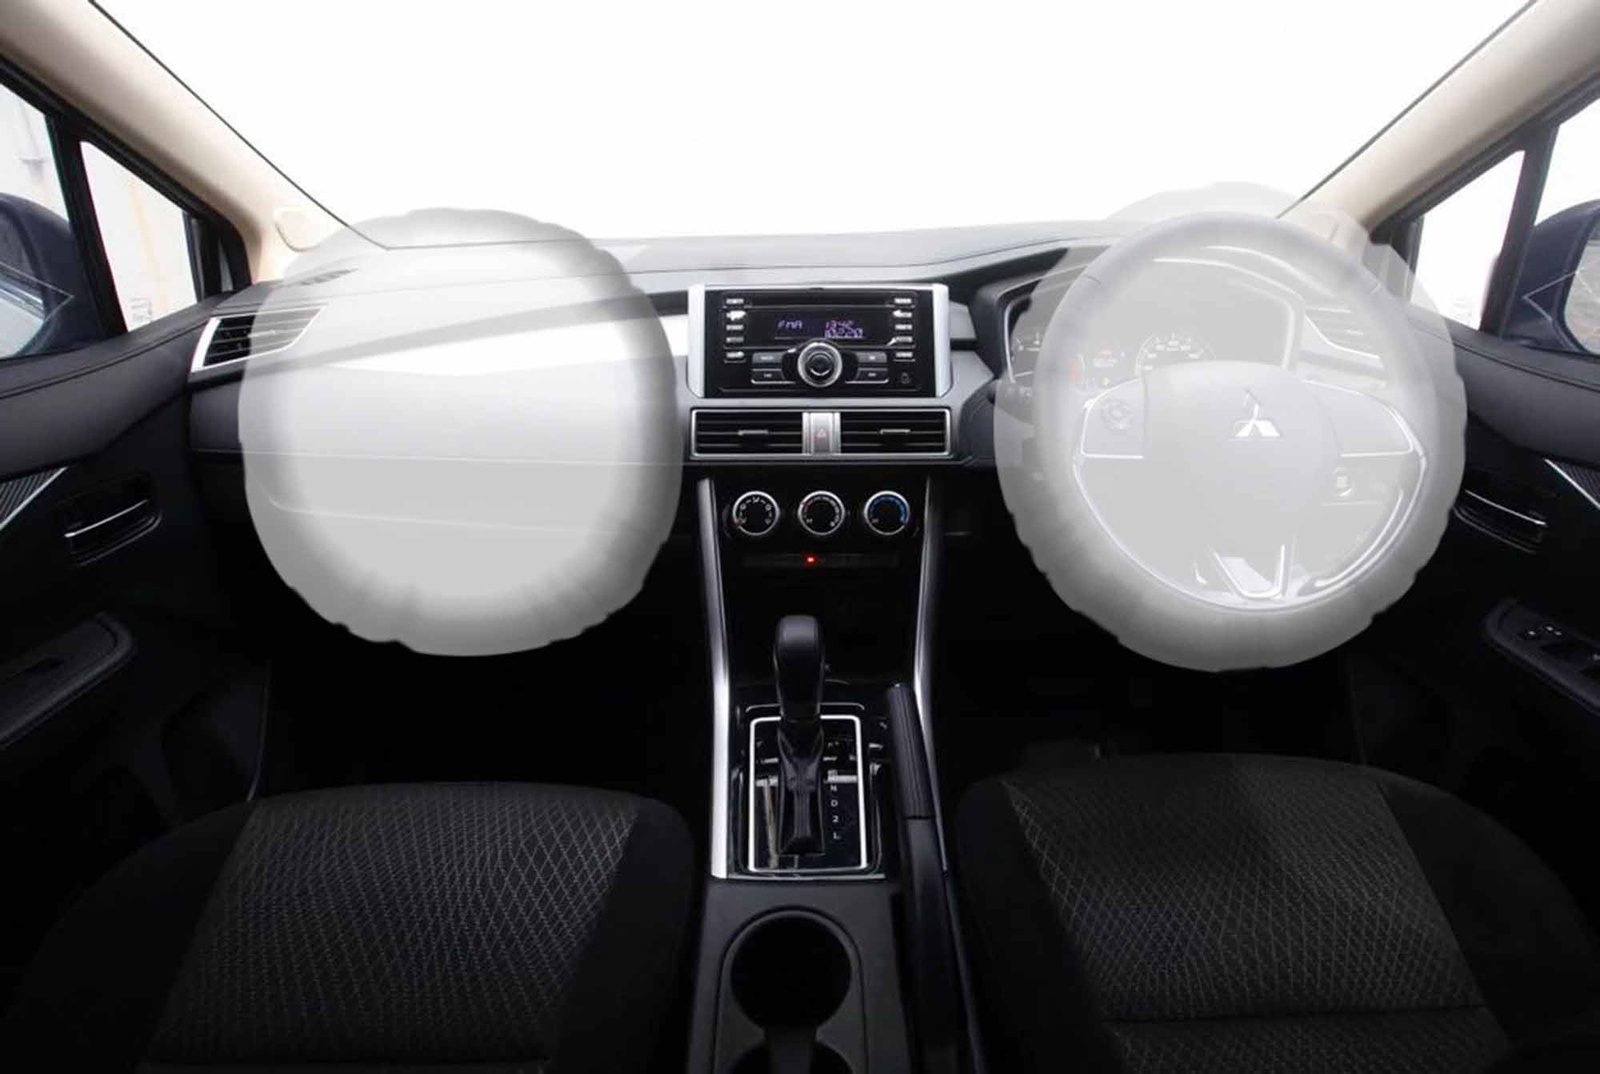 Dual srs airbags